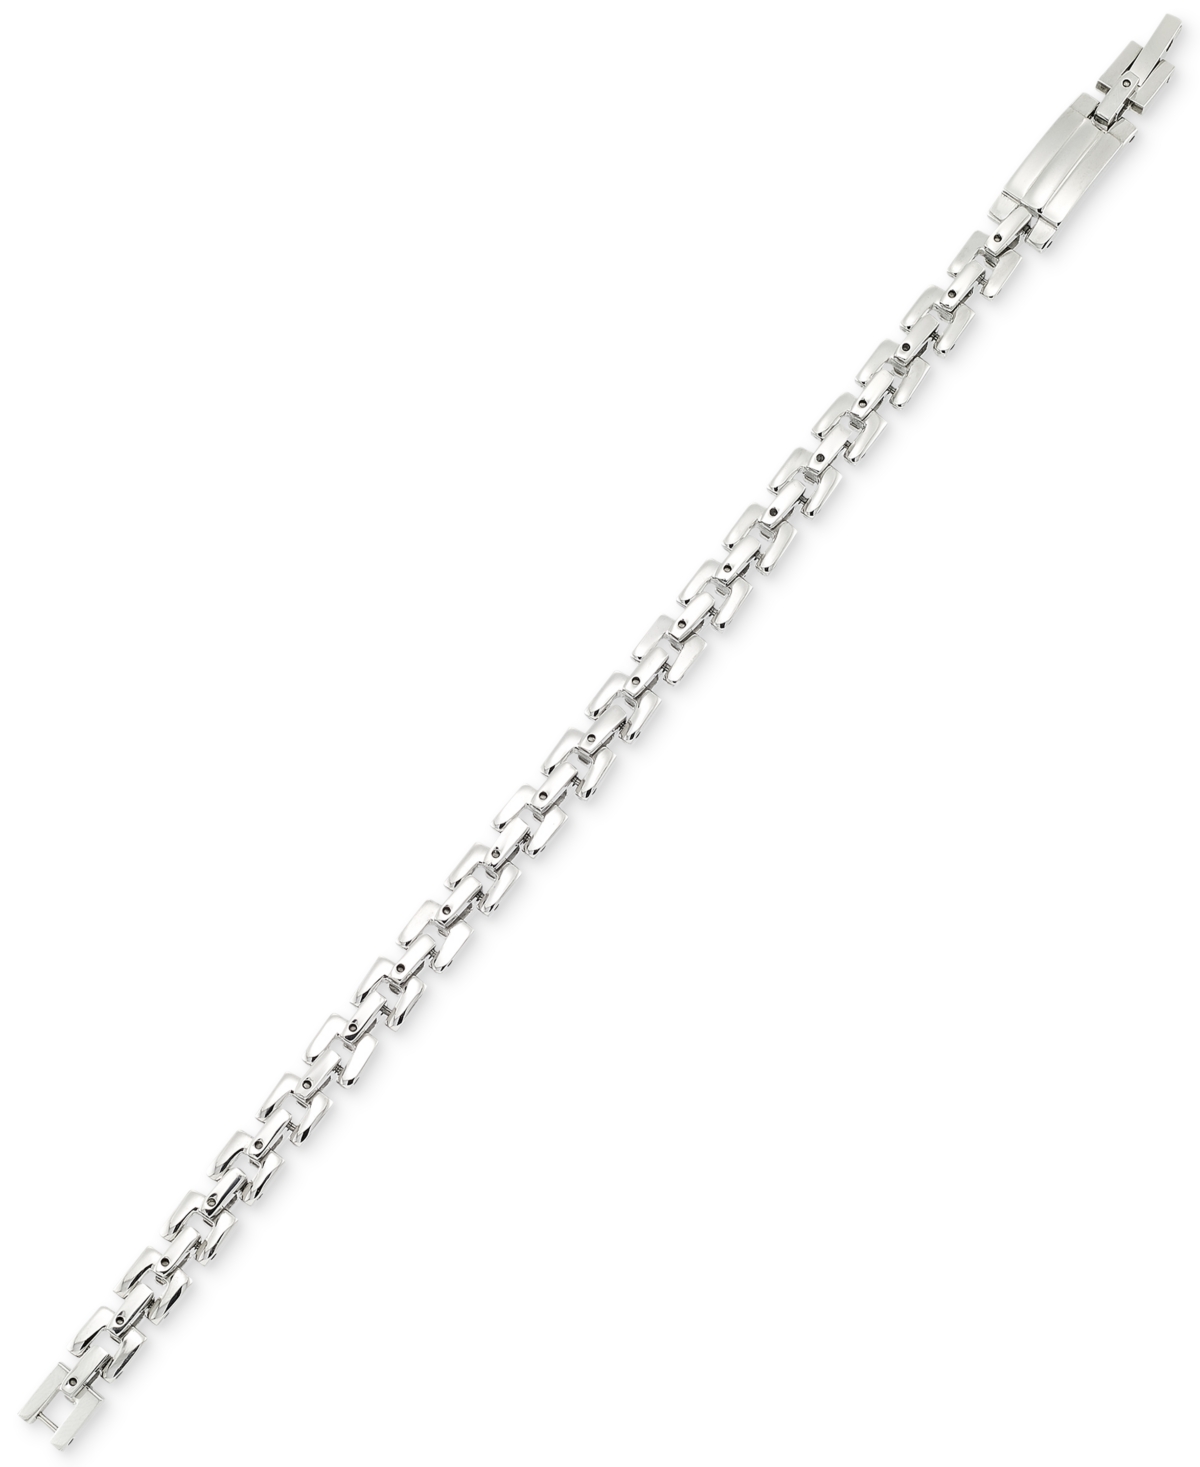 Smith Men's Square Link Bracelet in Stainless Steel - Stainless Steel